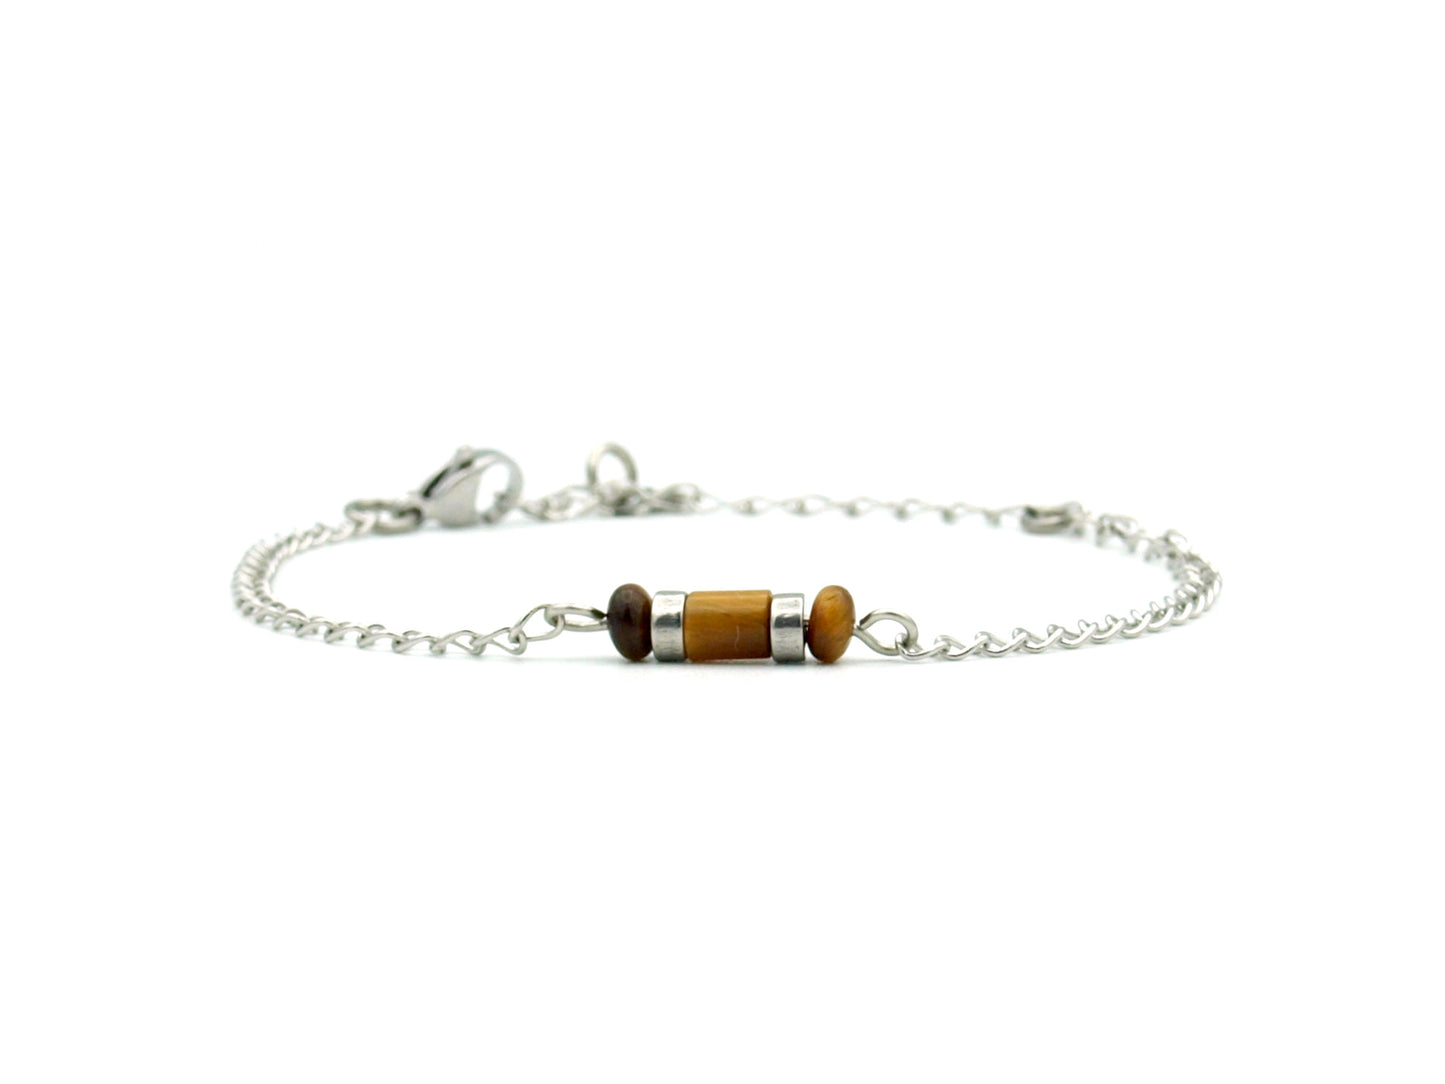 Bracelet Iris tiger's eye, silver and gold stainless steel